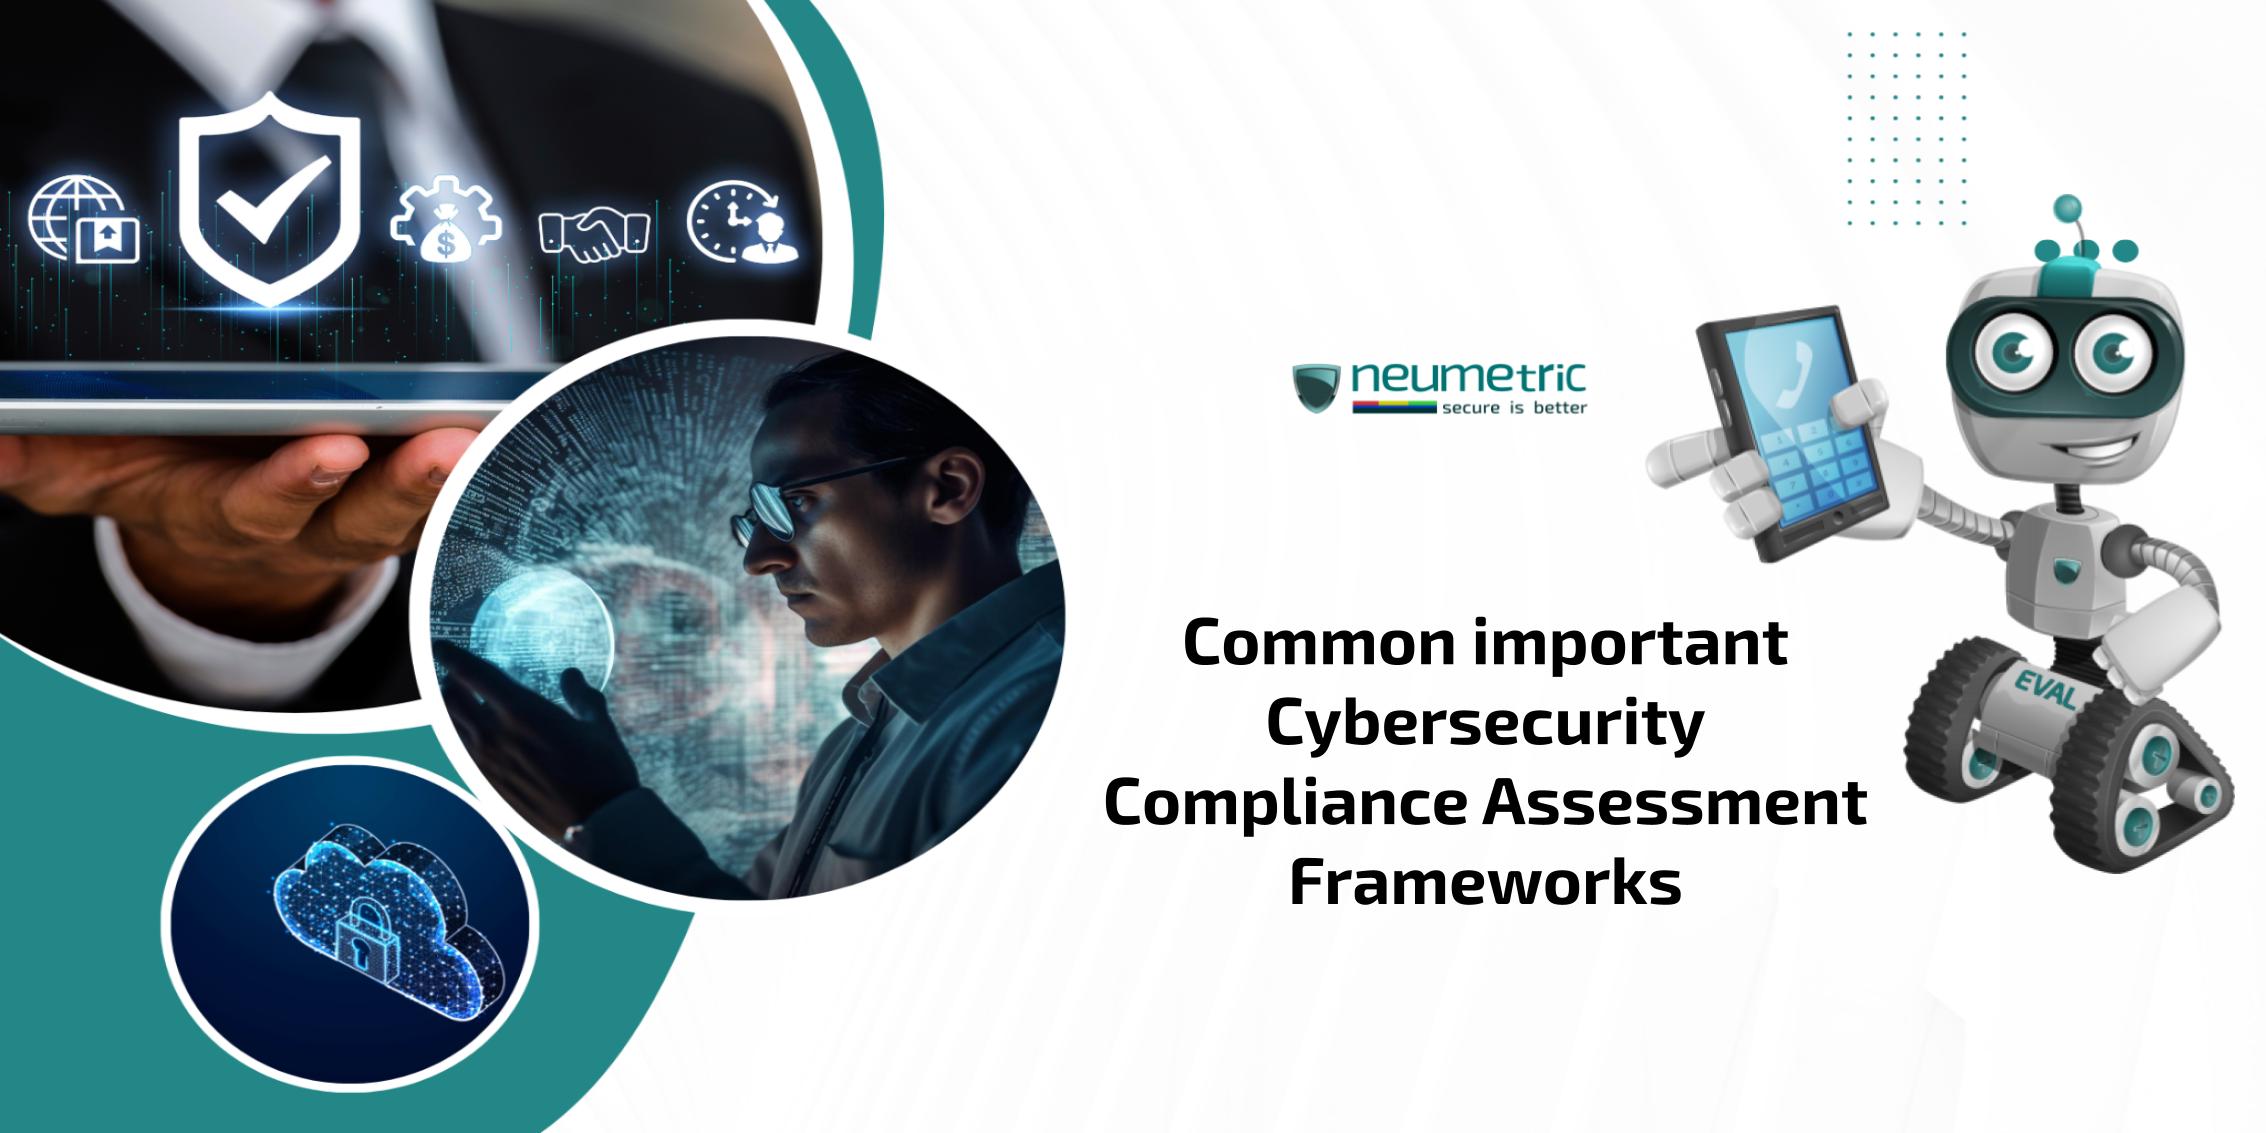 Cybersecurity compliance assessment frameworks